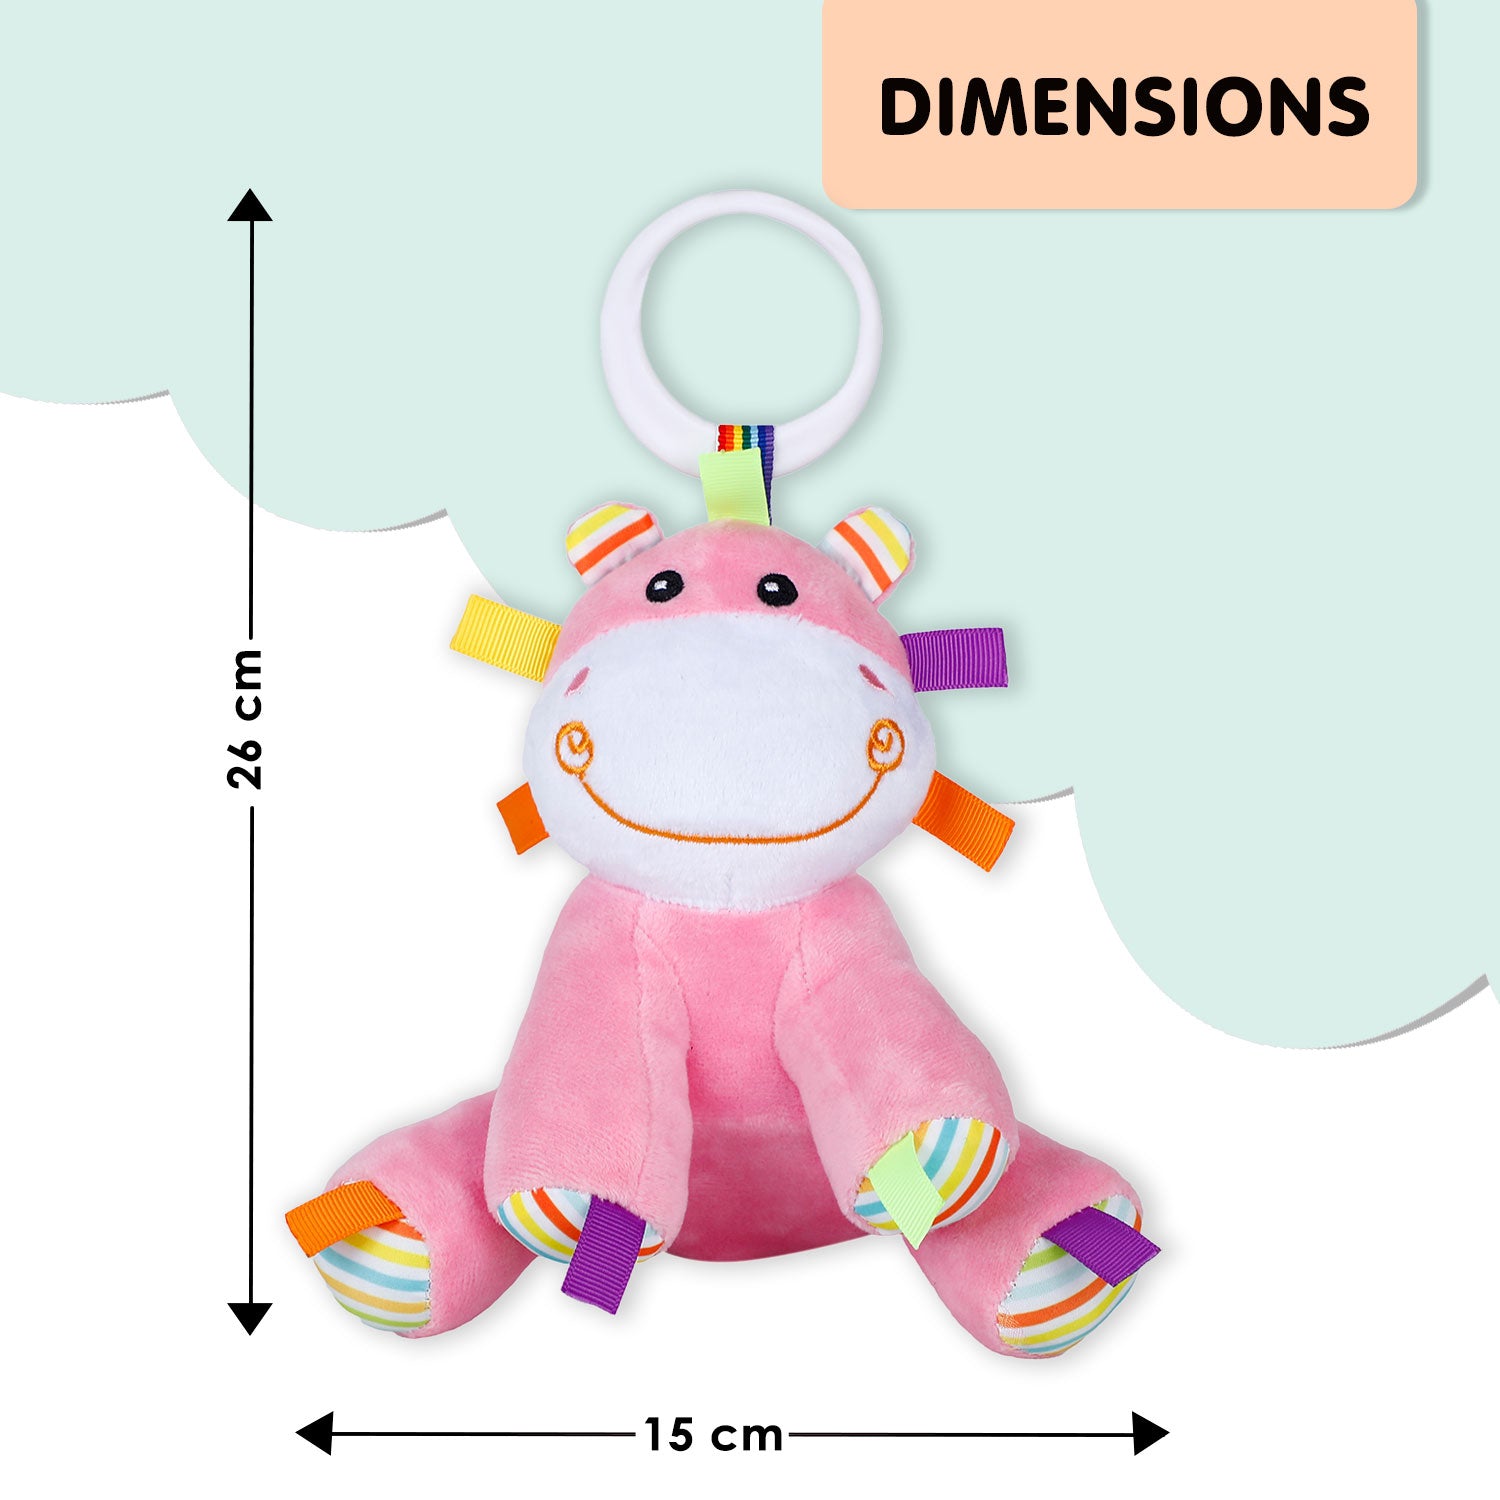 Baby Moo Baby Hippo Hanging Musical Pulling Toy - Pink